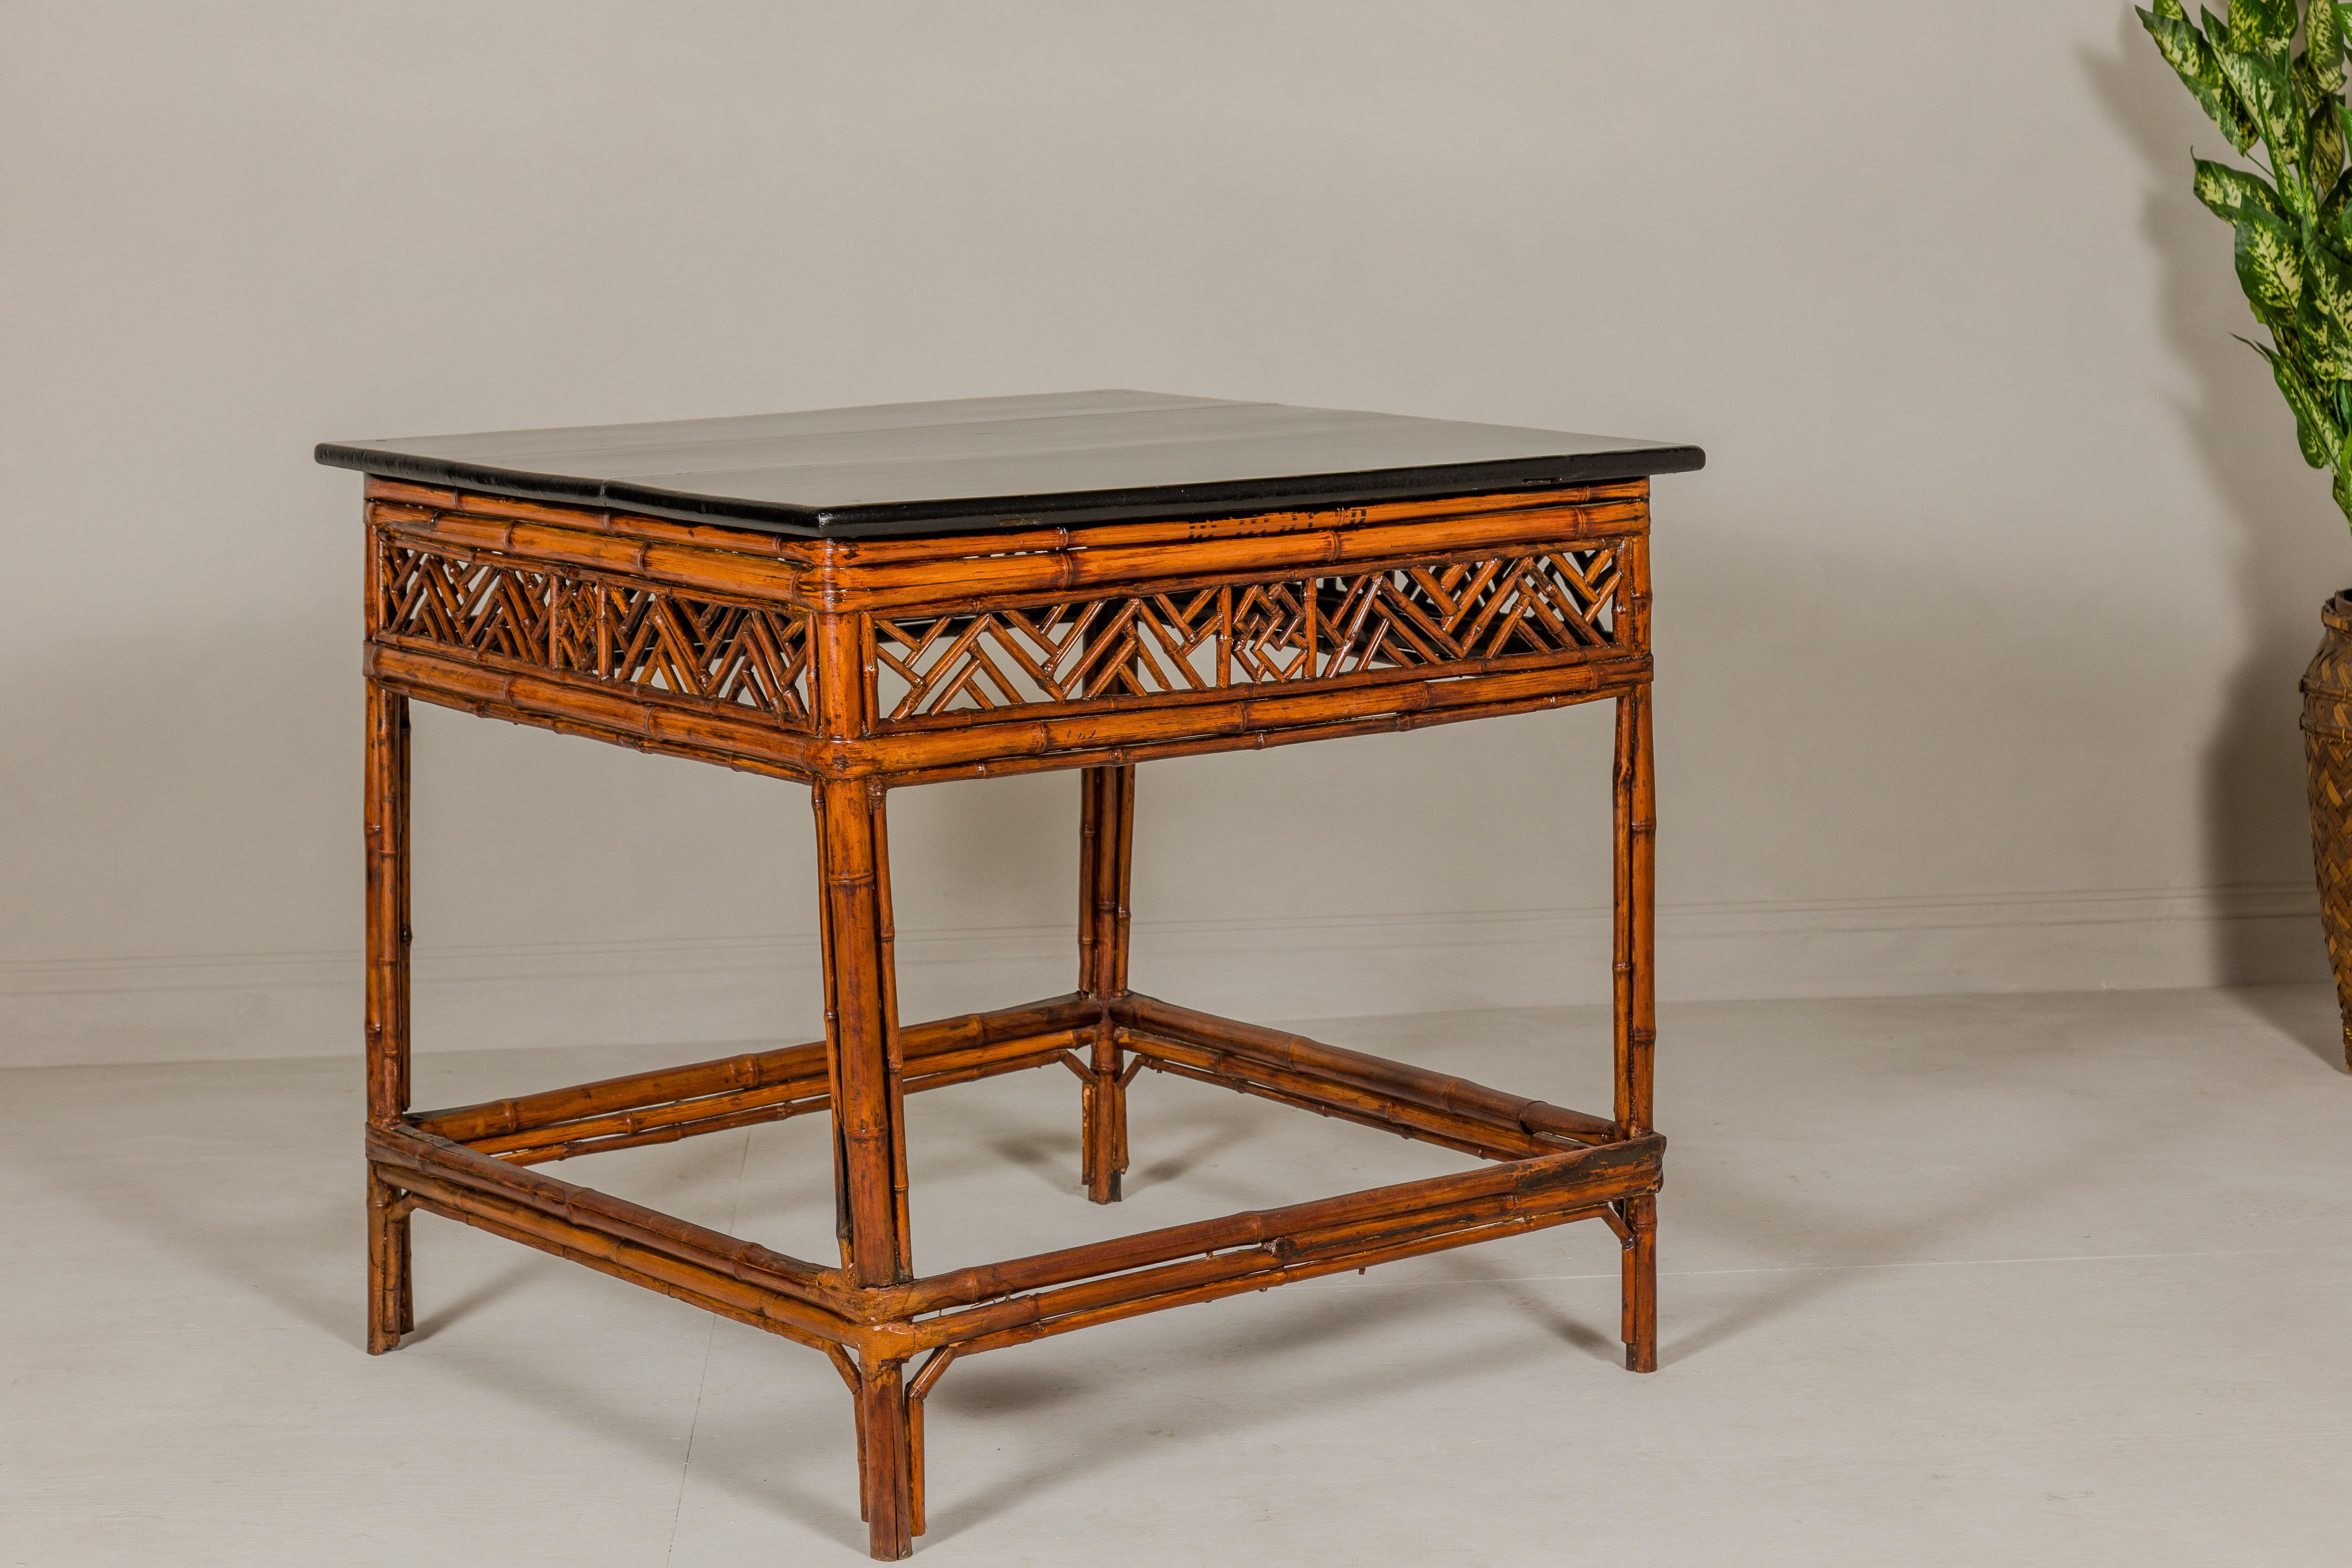 Bamboo Qing Dynasty Center Table with Geometric Apron and Black Lacquered Top For Sale 6